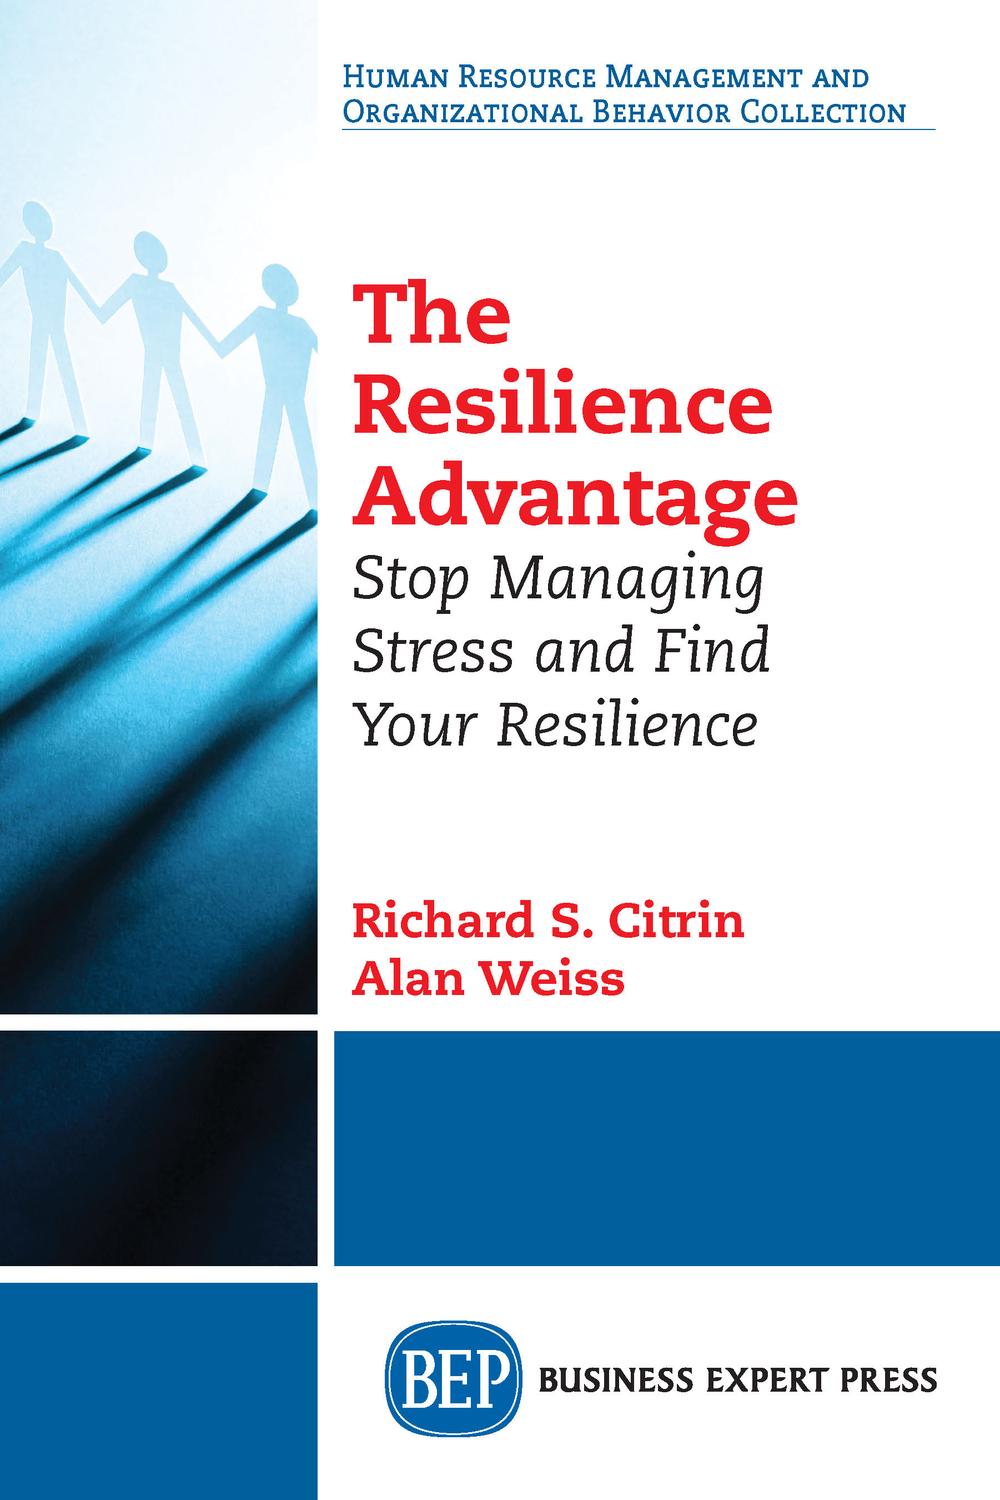 The Resilience Advantage - Richard S. Citrin, Alan Weiss